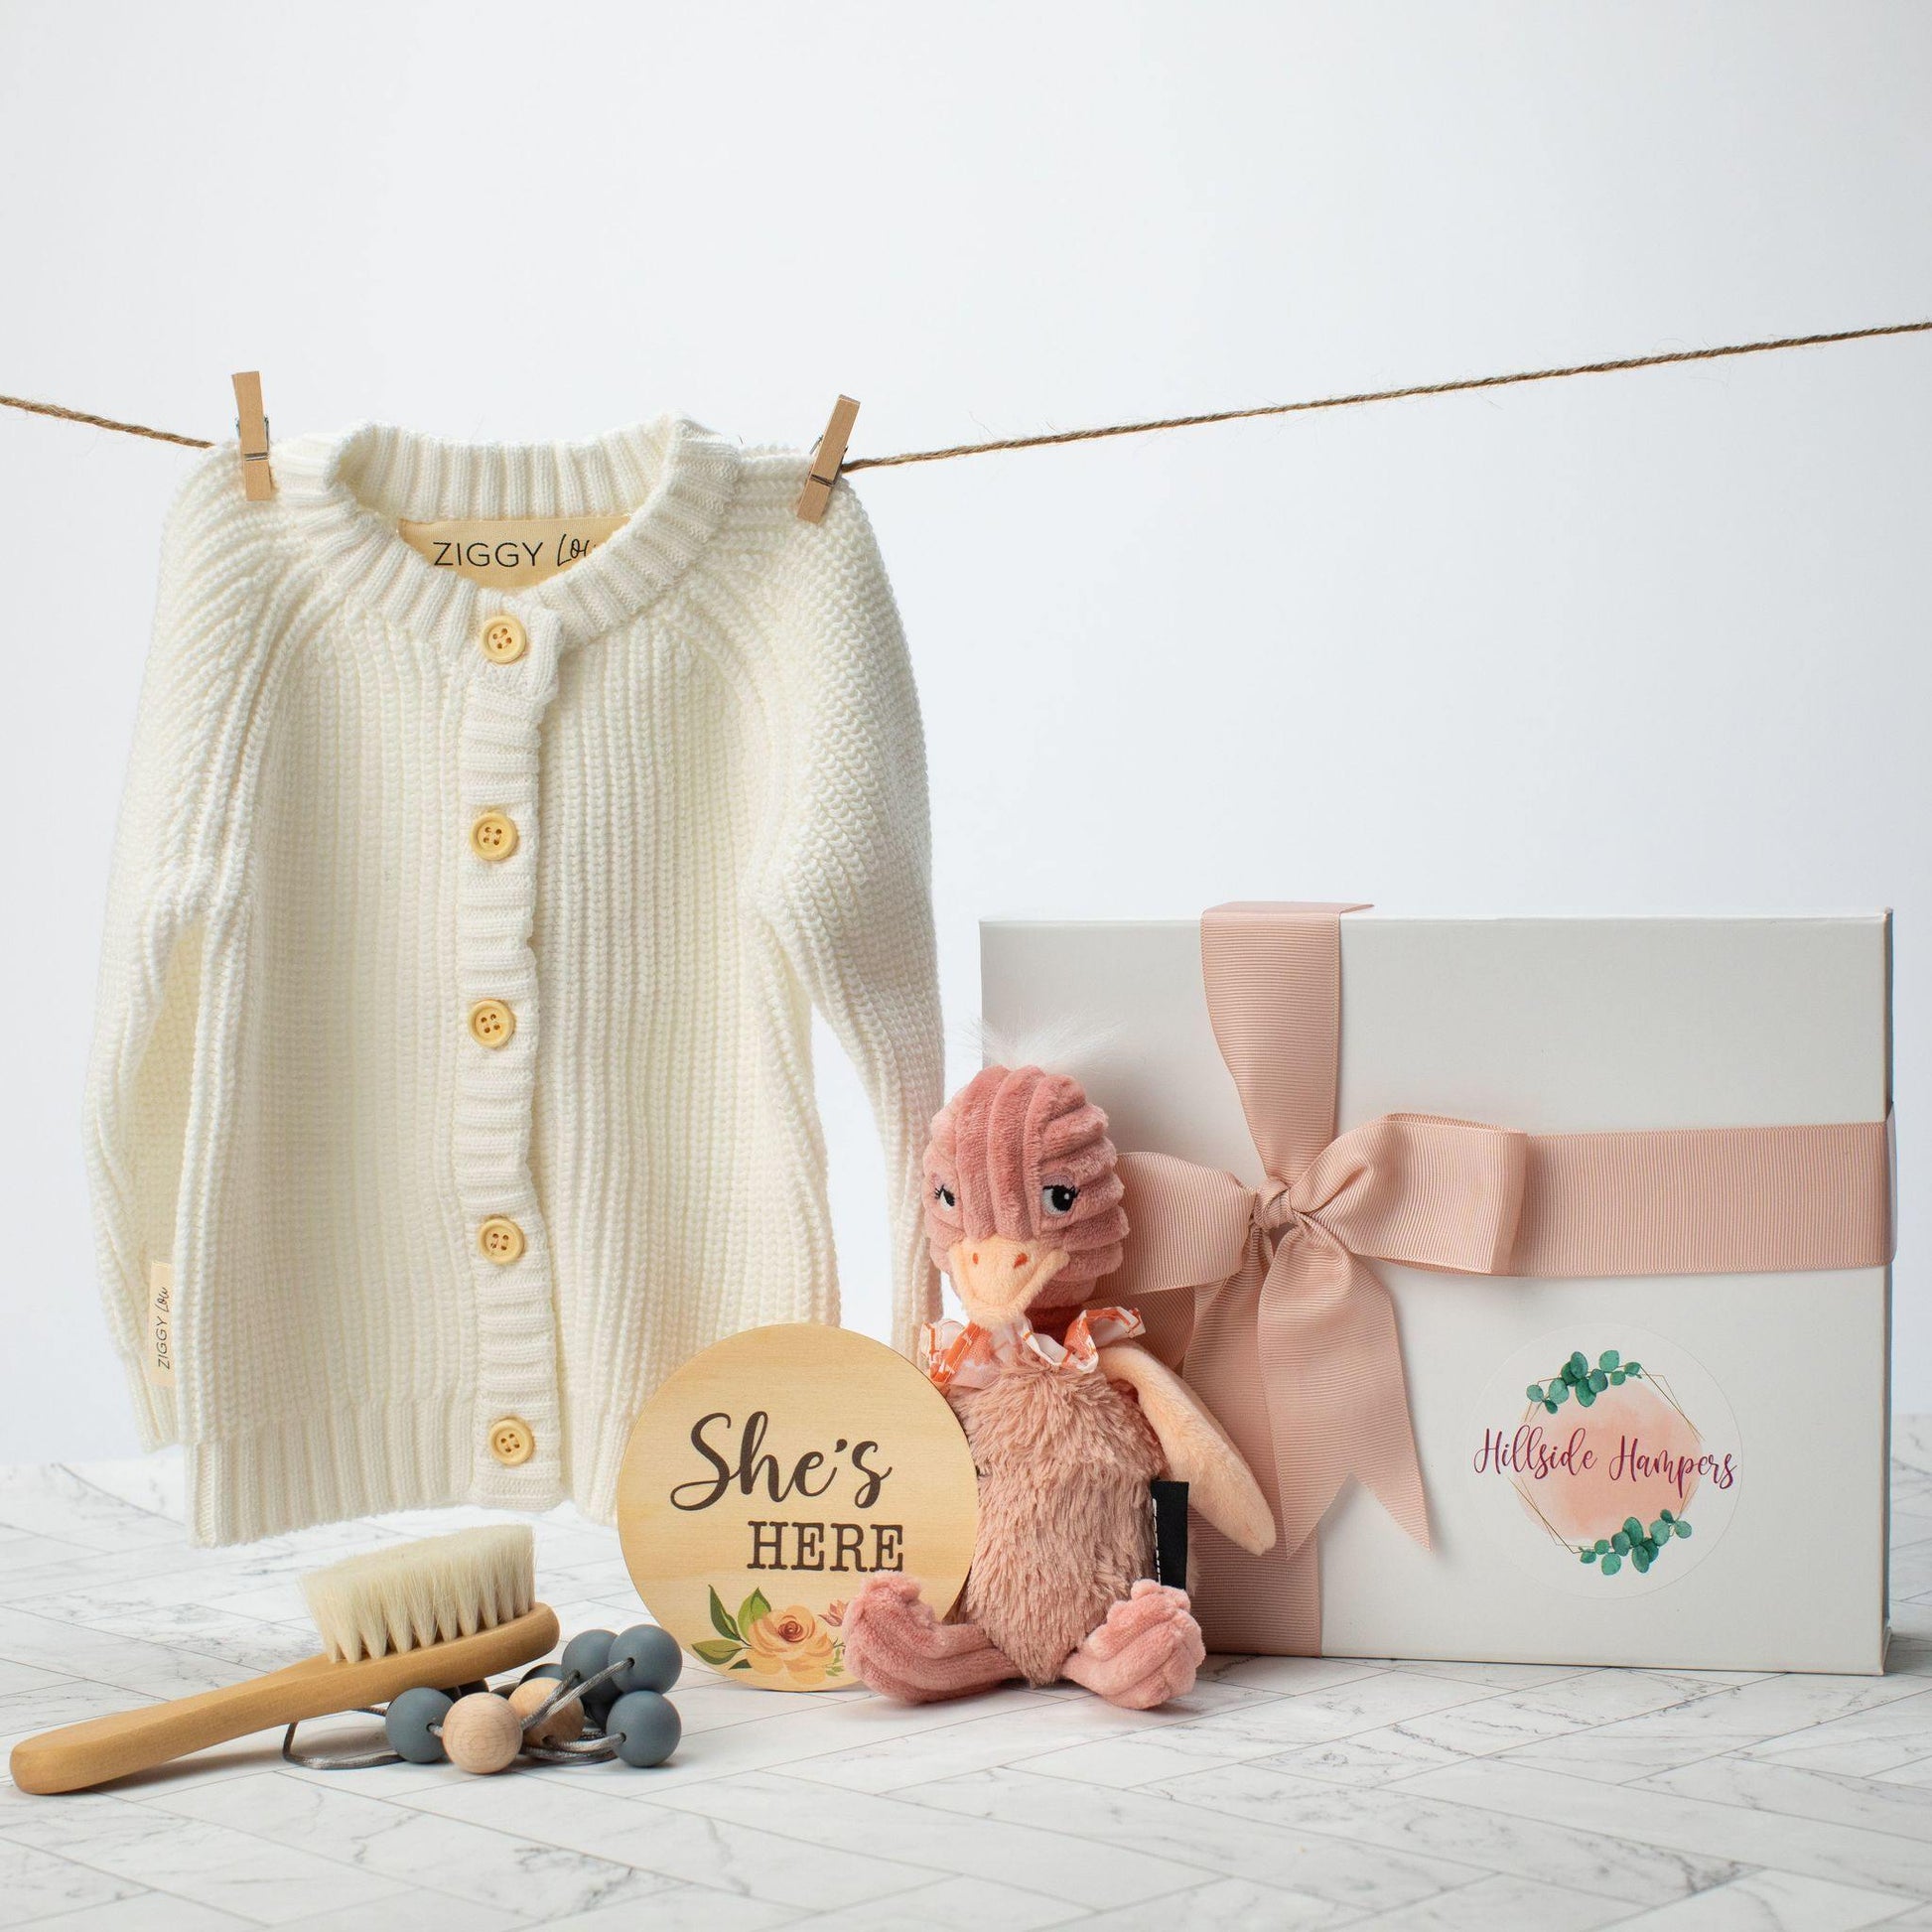 White baby cardigan next to a white gift box and soft baby toy, She's here sign, baby hair brush and teething necklace. 